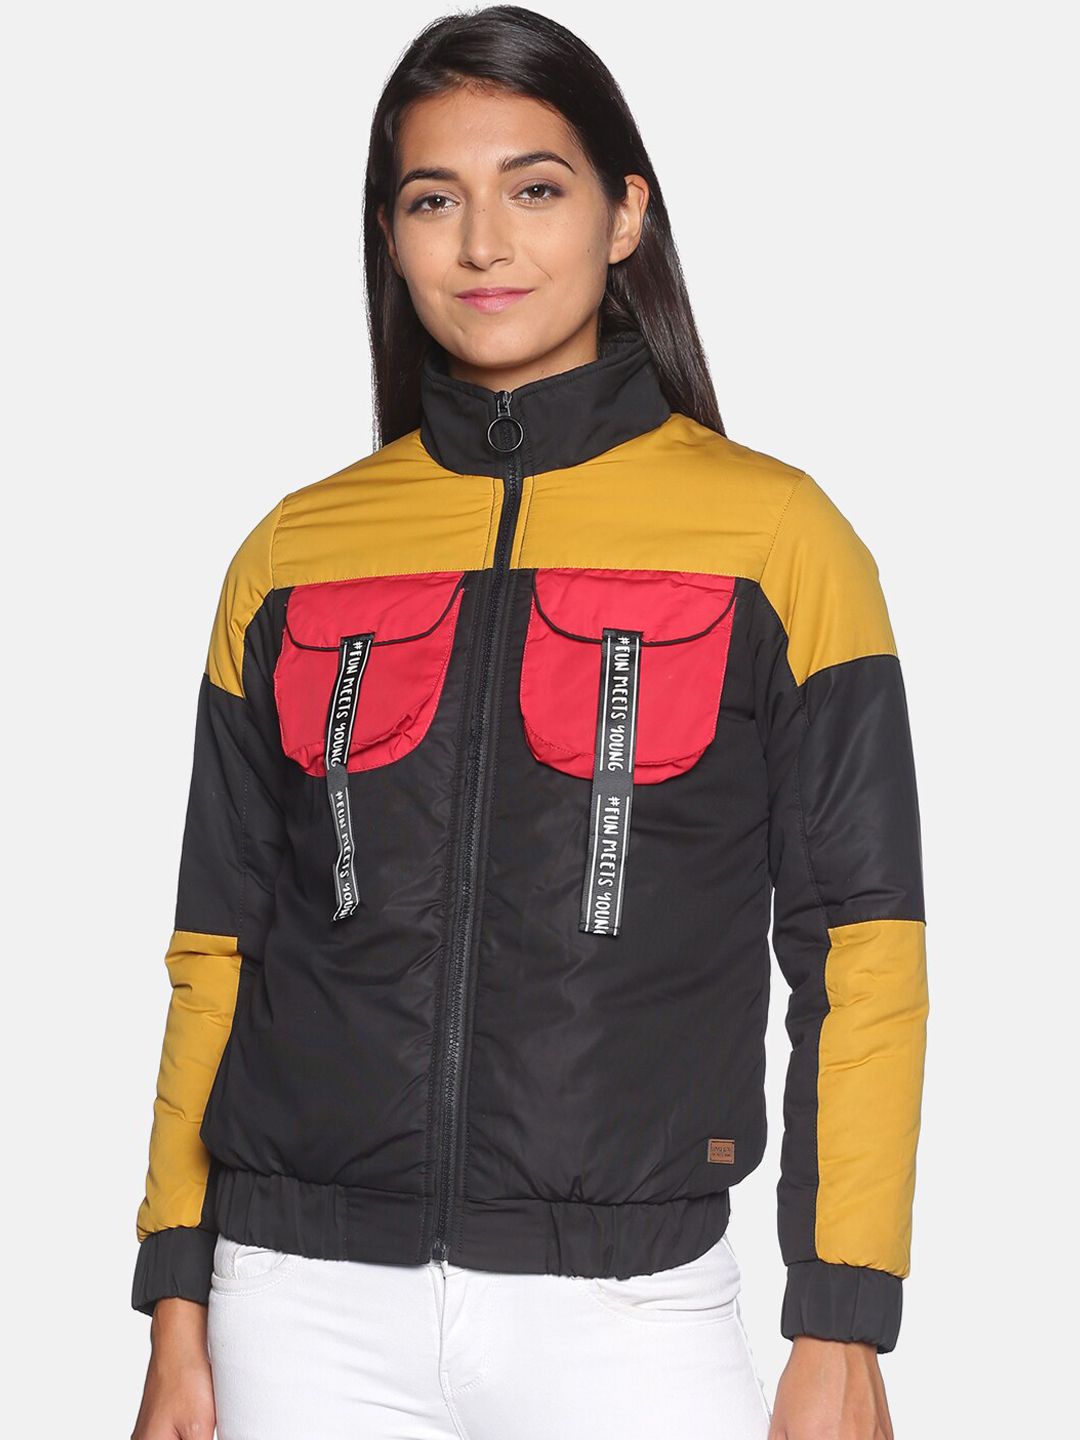 Campus Sutra Women Black & Yellow Colourblocked Windcheater Bomber Jacket Price in India